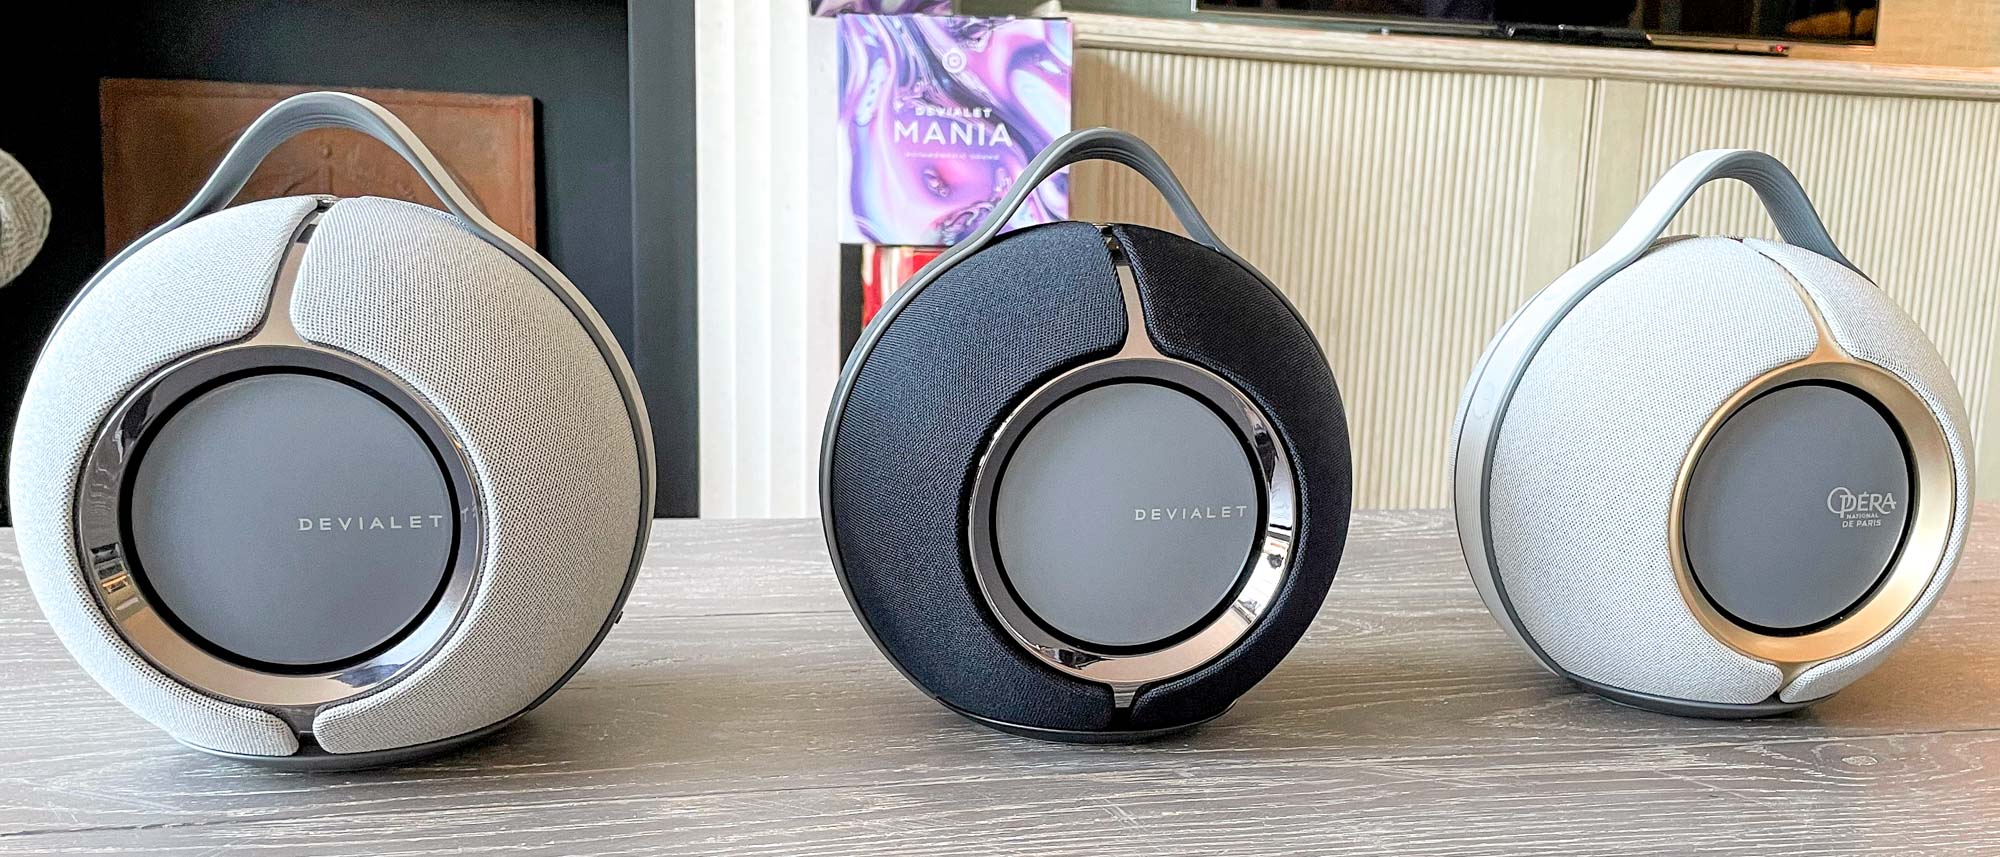 Devialet Mania hands-on: This luxury portable speaker looks great — and I  want one | Tom's Guide